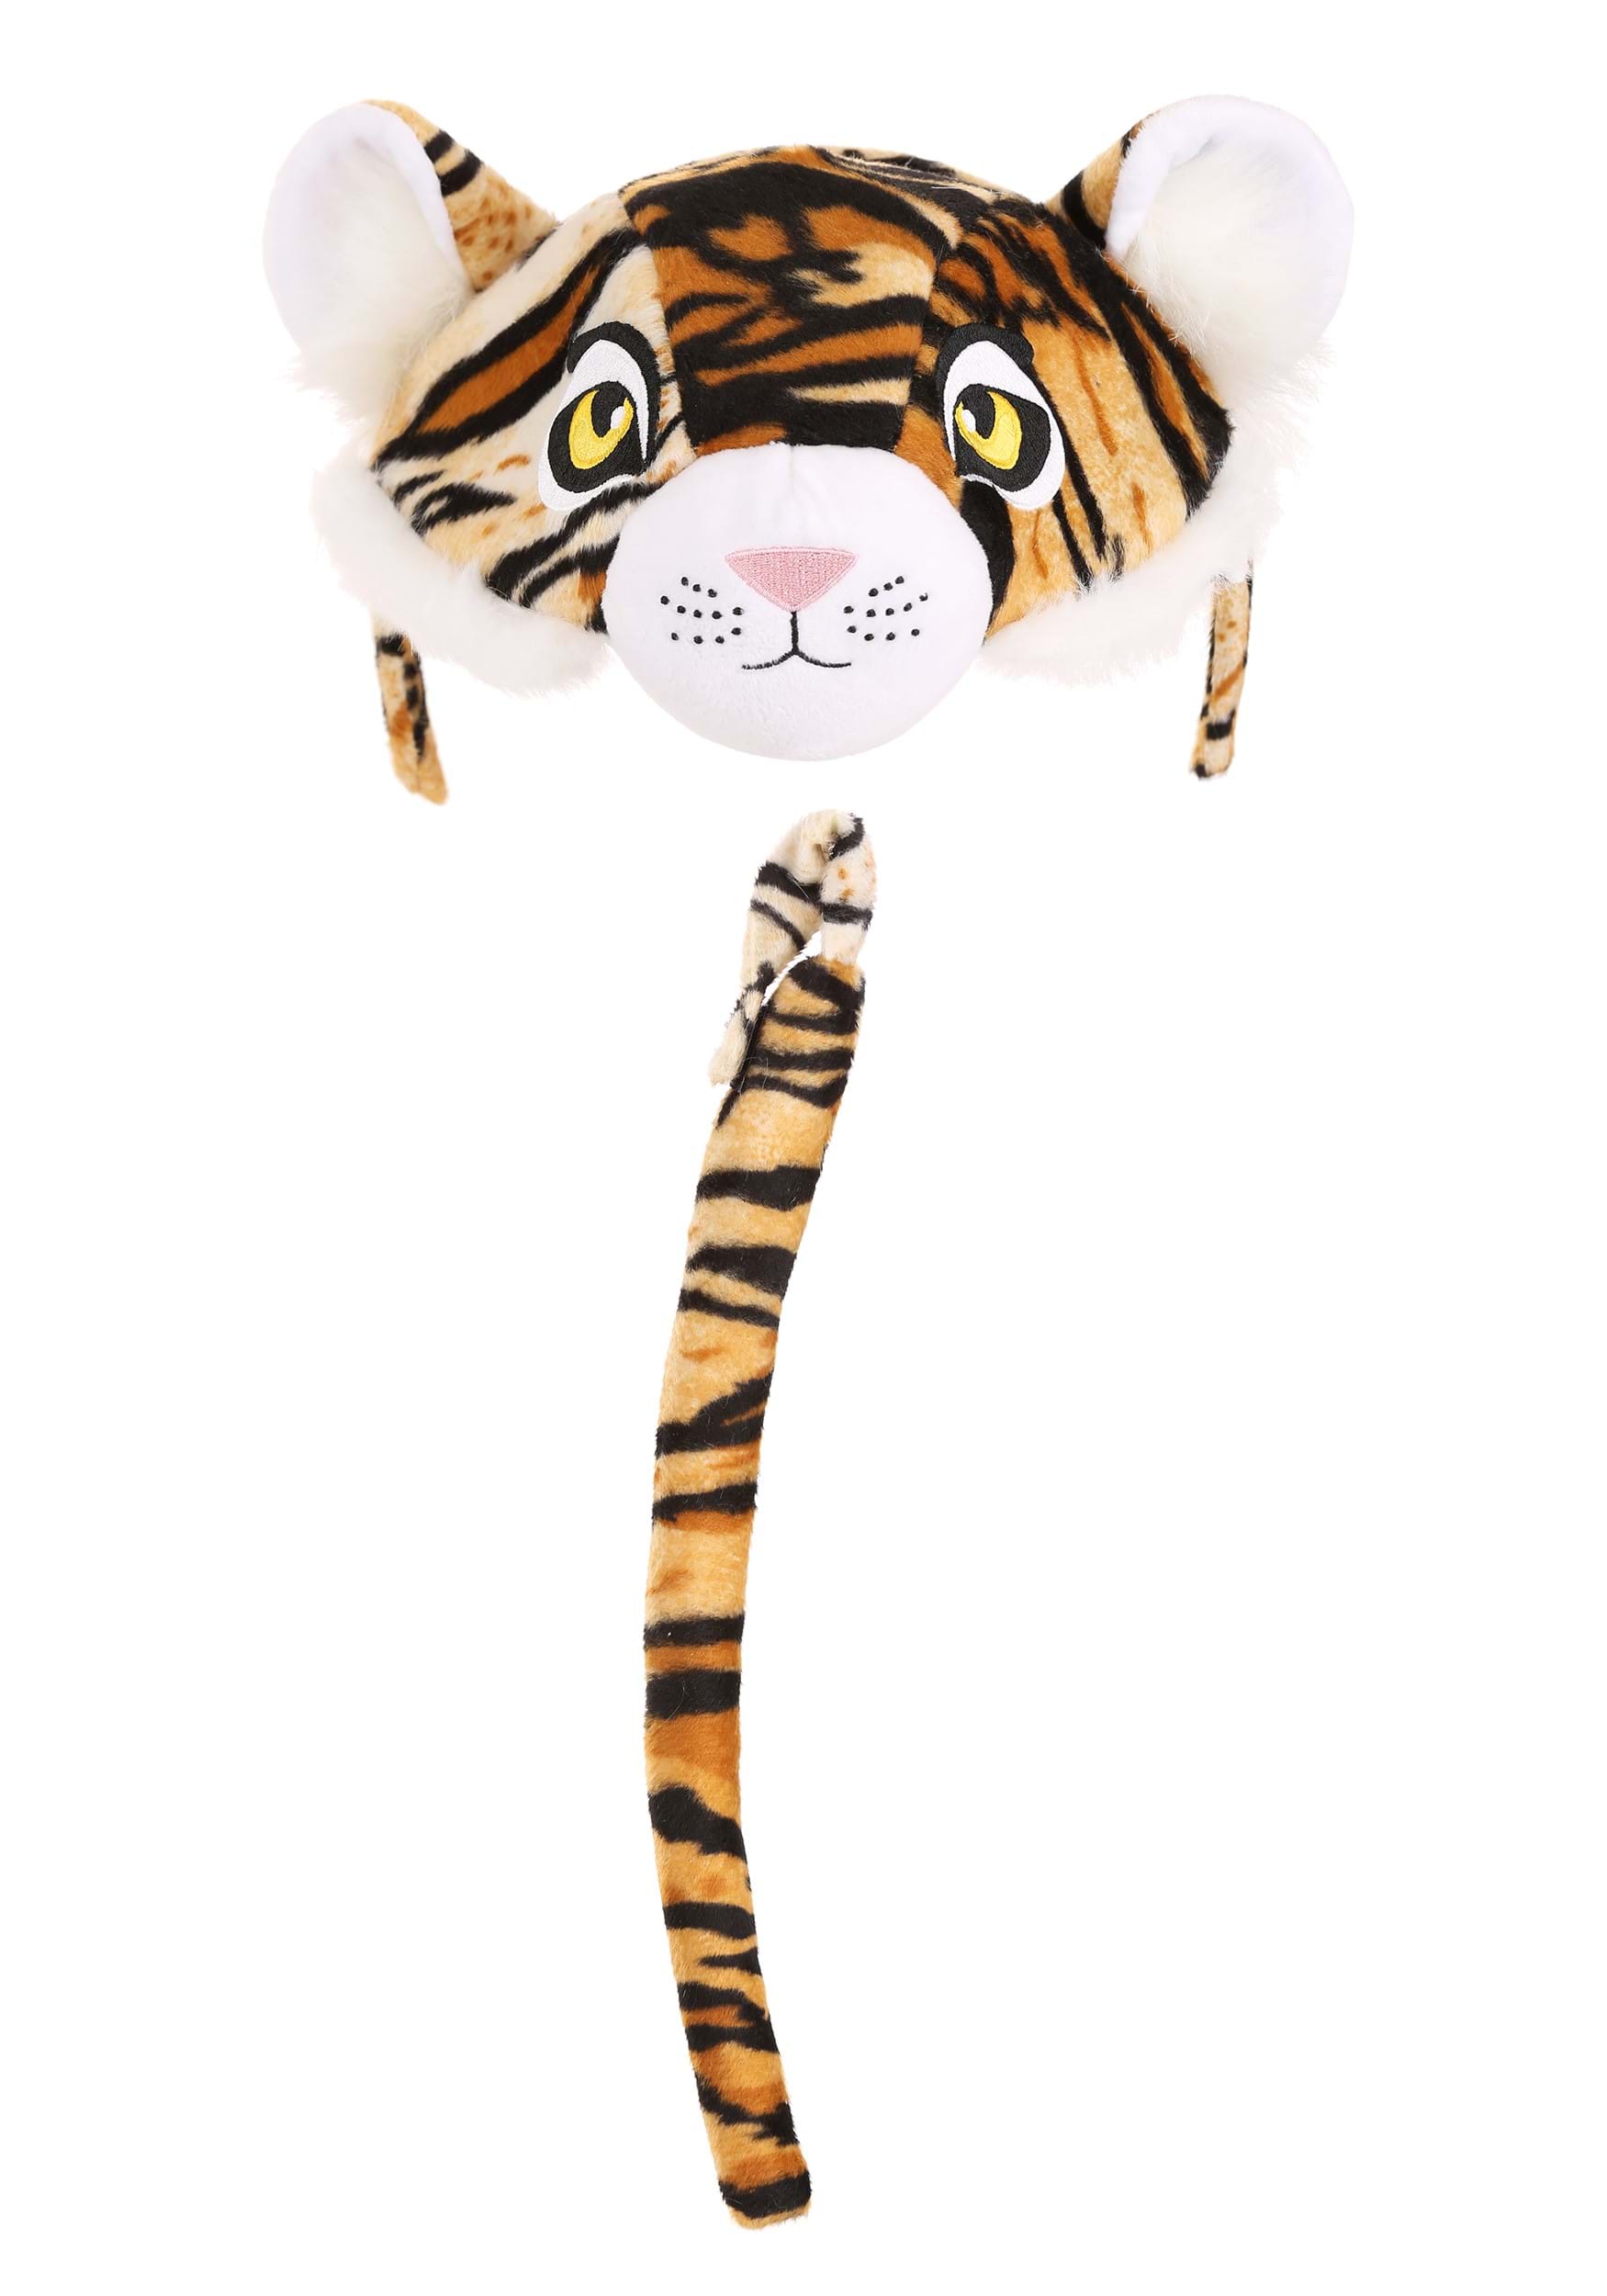 Tiger Animal Ears Headband and Tail Costume Accessory Kit for Kids and Adults Orange 